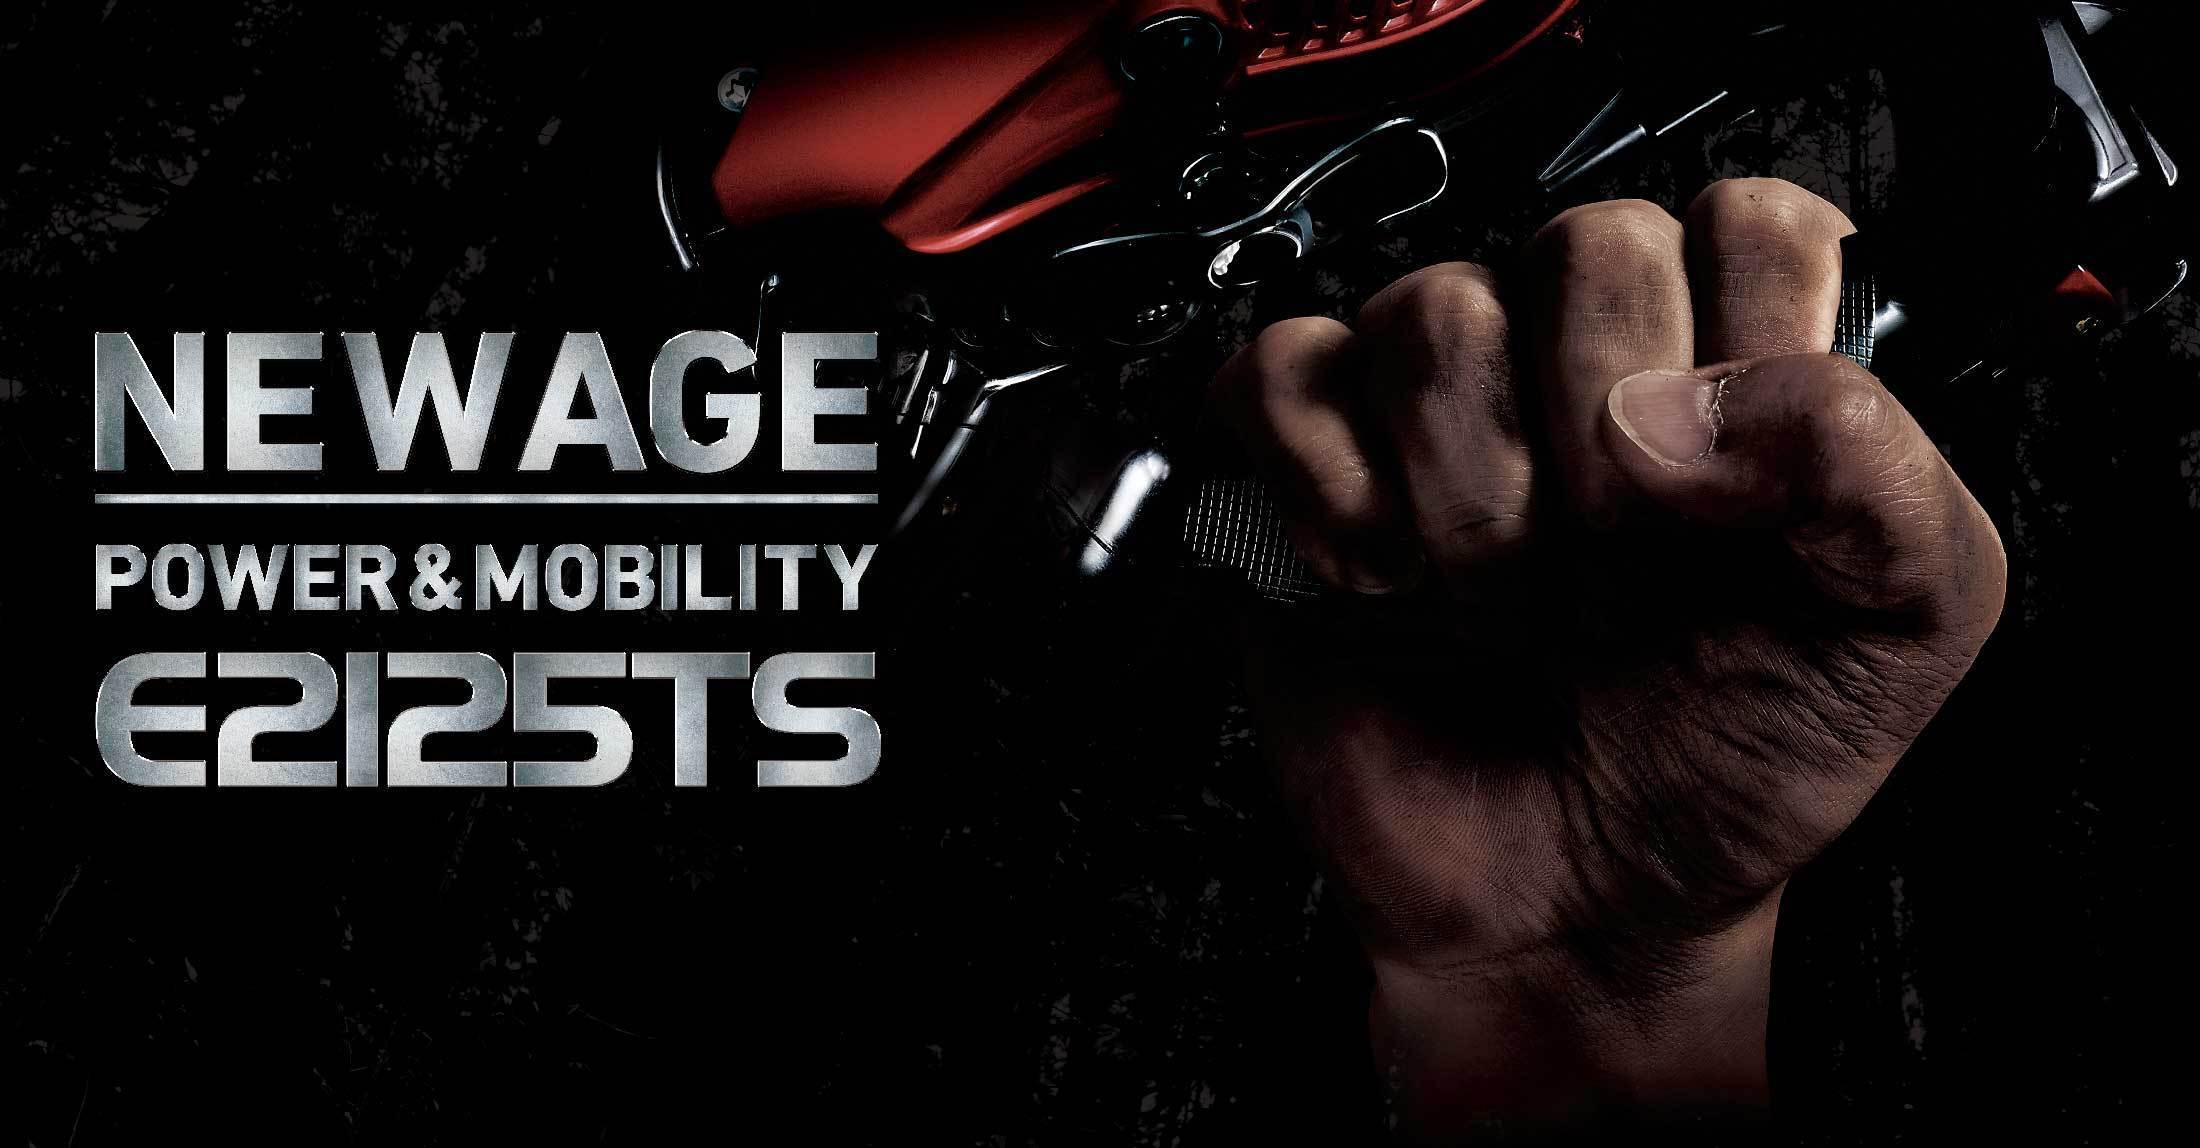 POWER & MOBILITY ETS   新ダイワ公式